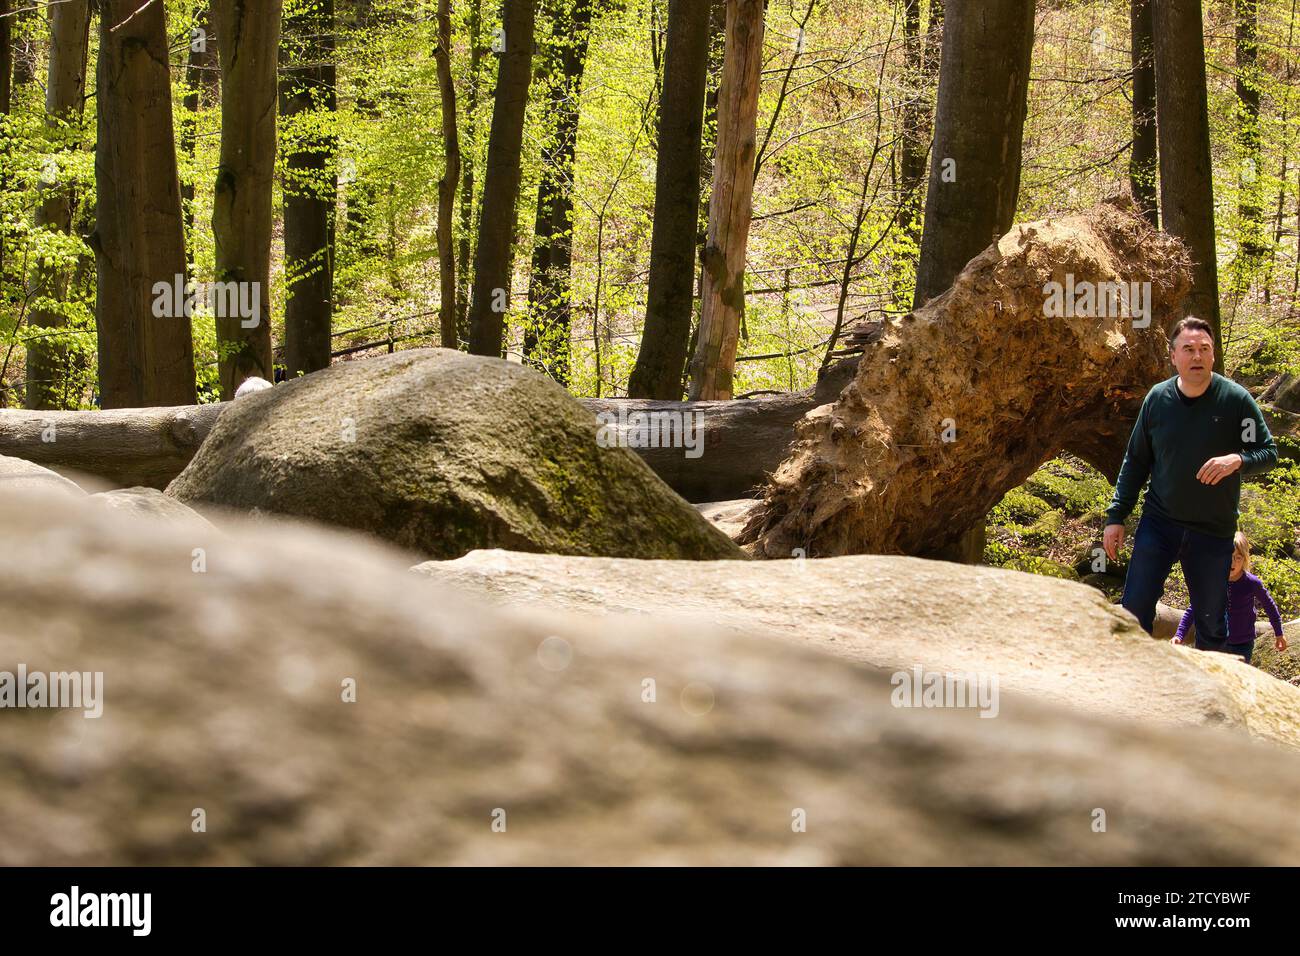 Lautertal, Germany - April 24, 2021: Trees and a walking path next to large rocks at Felsenmeer on a spring day in Germany. Stock Photo